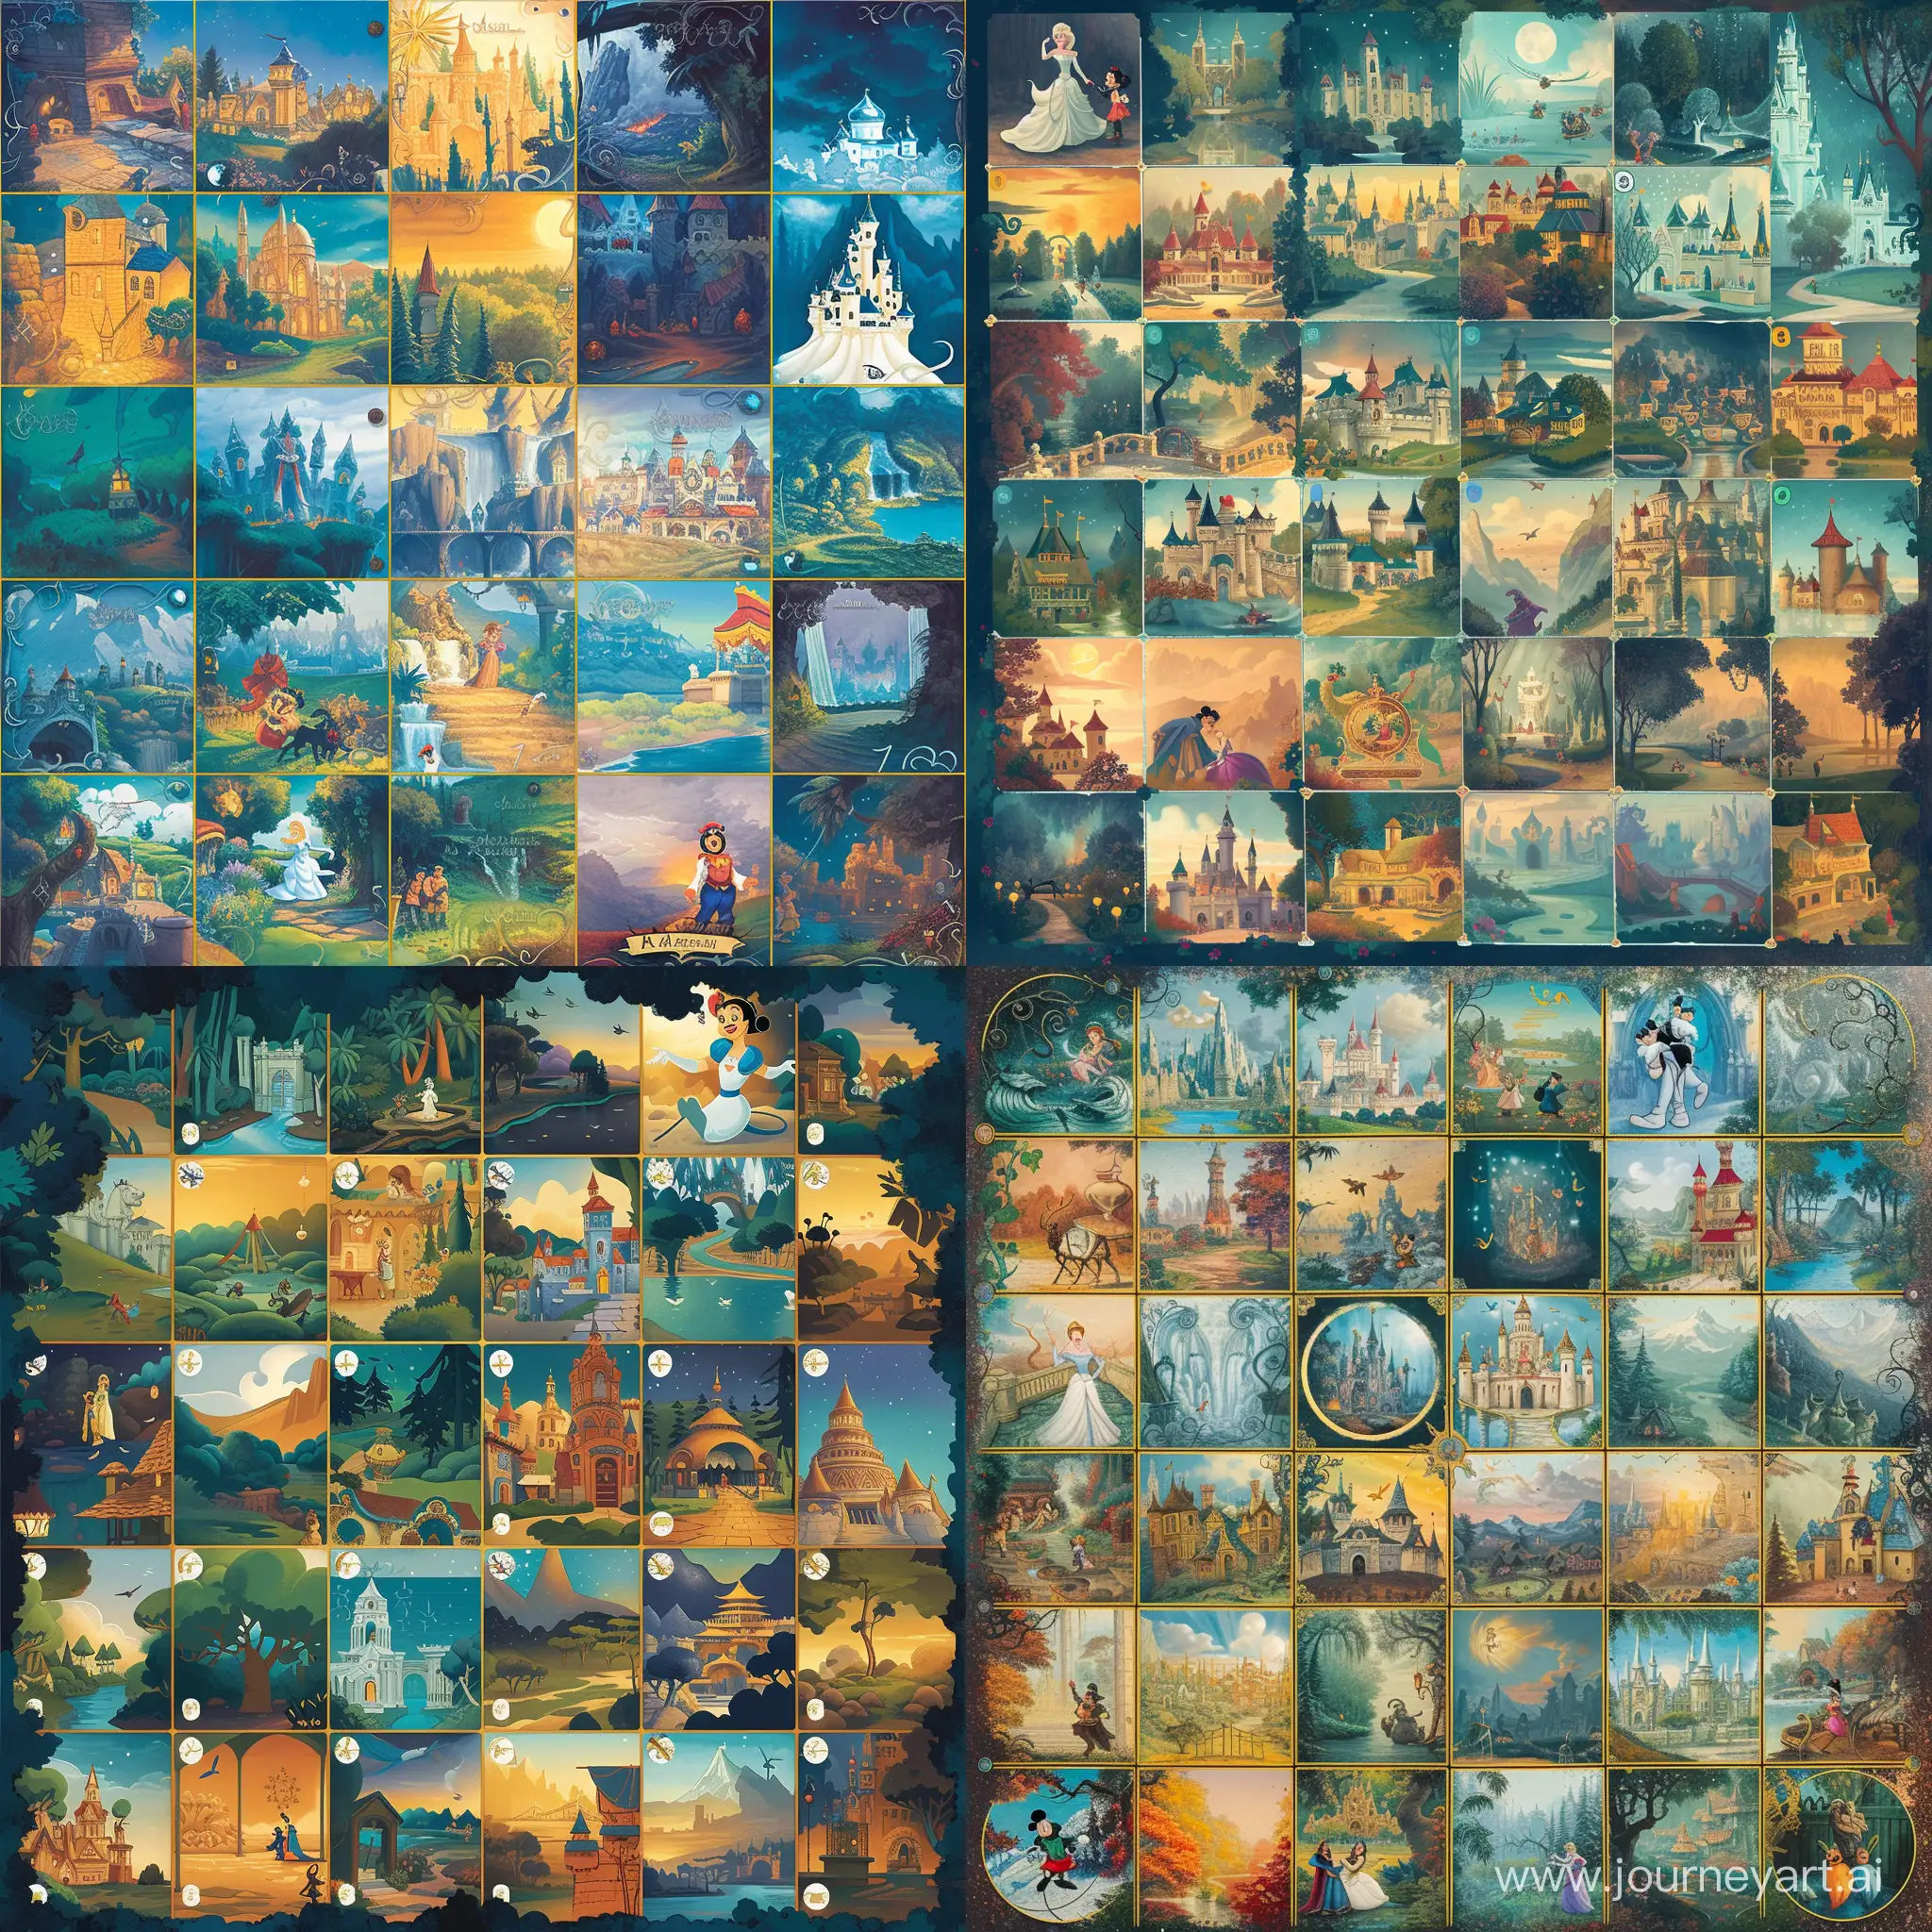  "Generate an image of a board game with 30 sections, each featuring Disney-themed motifs, akin to the game Dixit. Each section should represent an illustration of a distinct location from Disney, like Neverland, Arendelle, Agrabah, or other iconic Disney settings. The board should comprise creative illustrations that spark imaginative connections to stories and characters from the Disney universe. Motifs can encompass classic characters like Mickey Mouse, Cinderella, Aladdin, Beauty and the Beast, or any other beloved Disney character. The image should be vibrant, distinctive, and captivating, encouraging players to devise unique associations and stories within the magical Disney realm." disney cartoon style